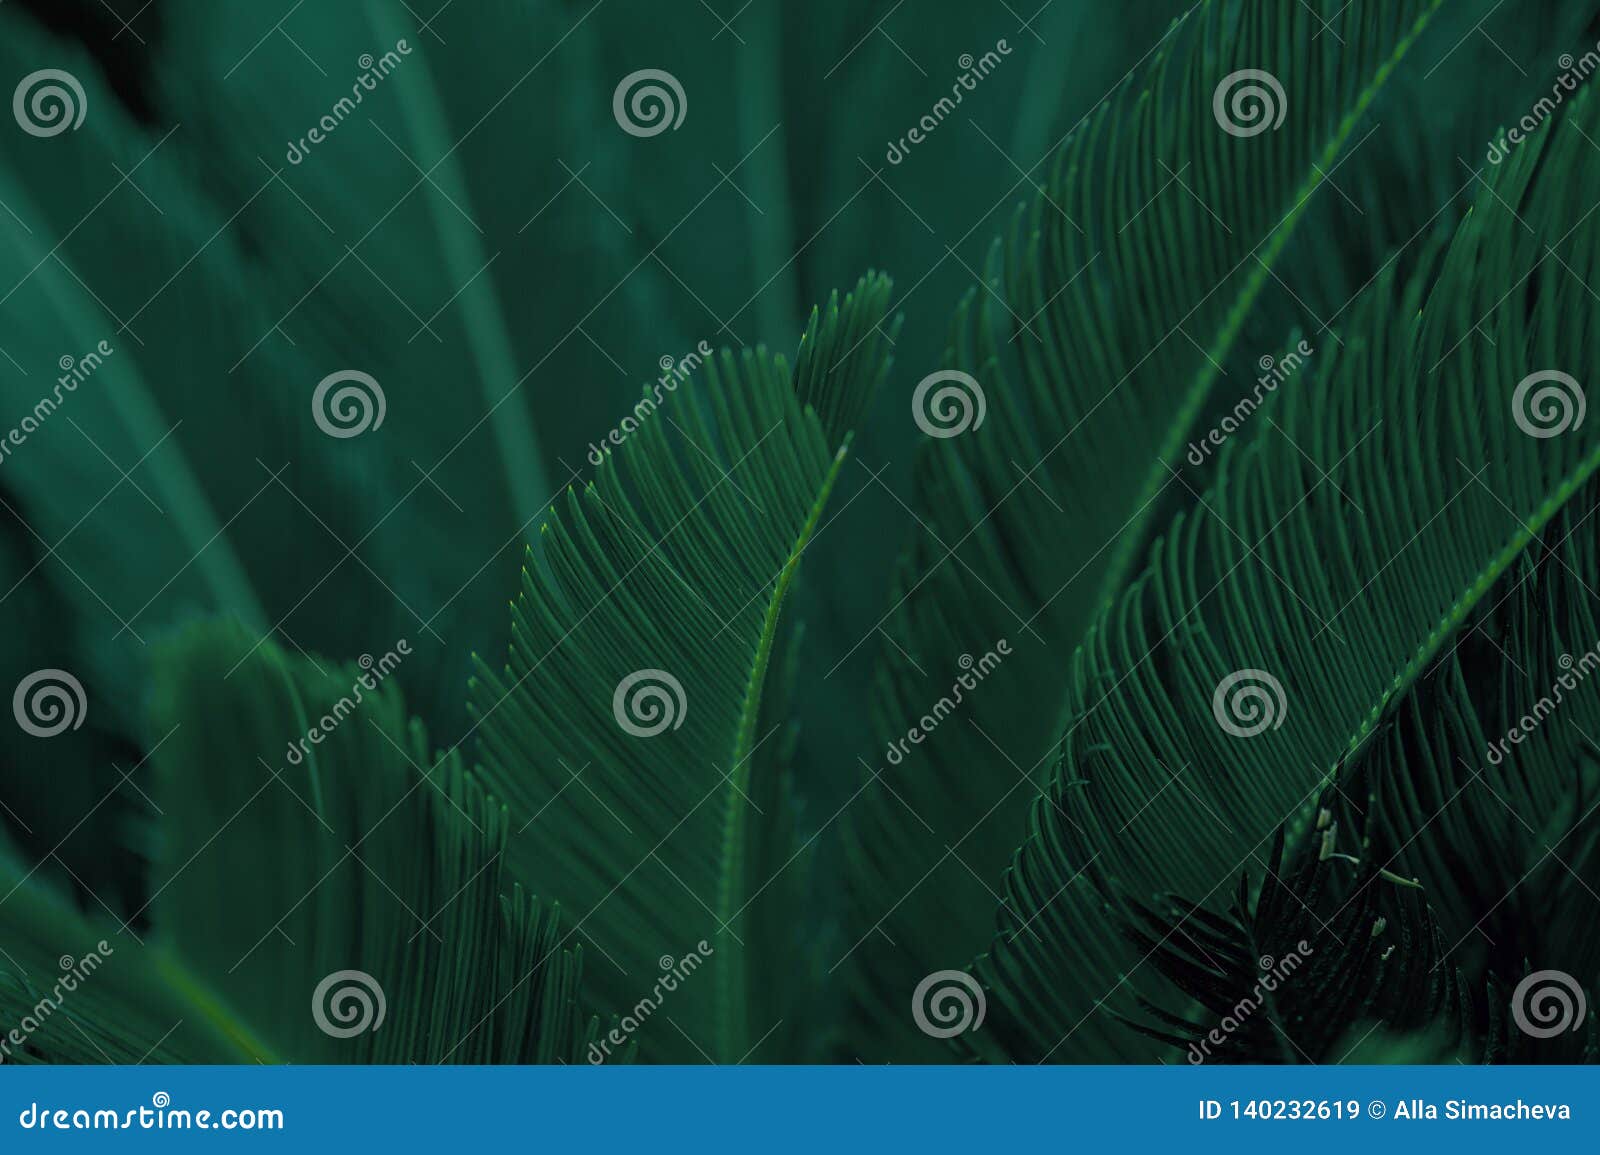 Palm Leaves Dark Green Background Stock Image - Image of creative